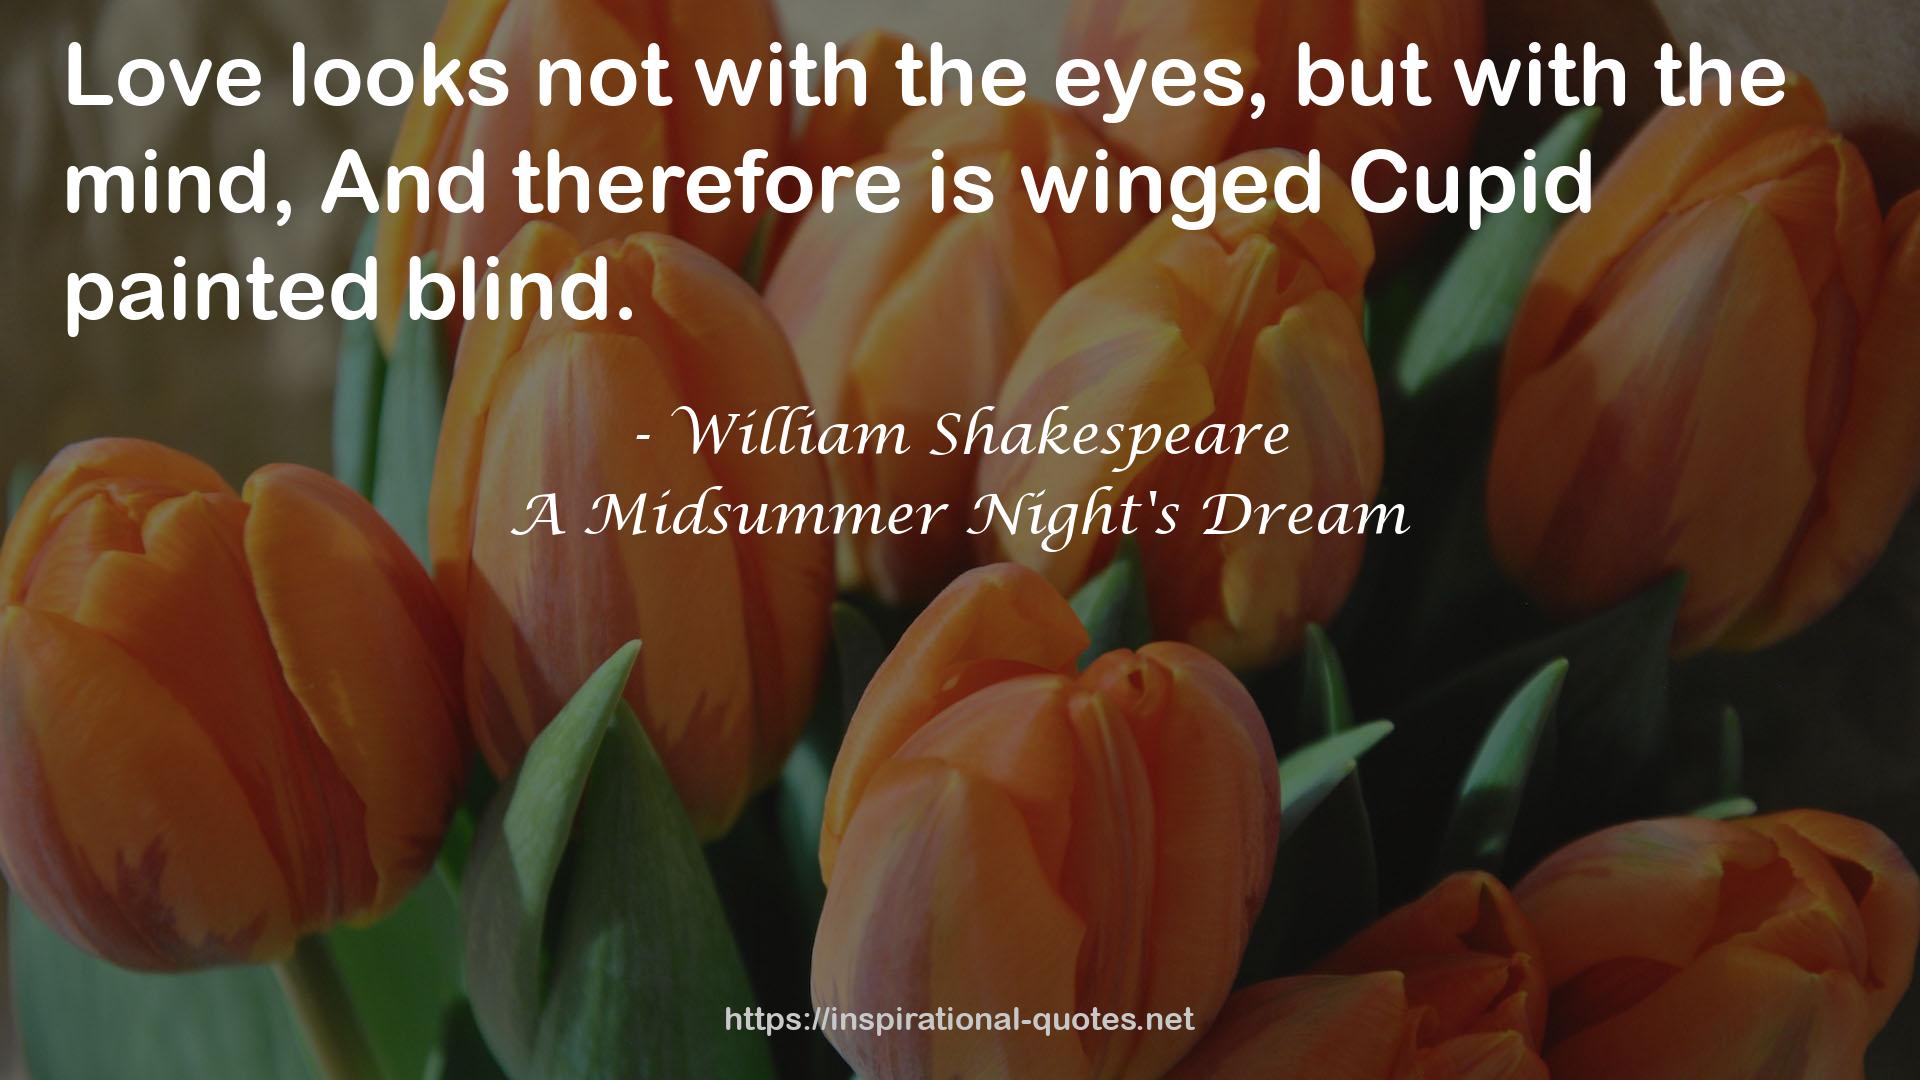 A Midsummer Night's Dream QUOTES